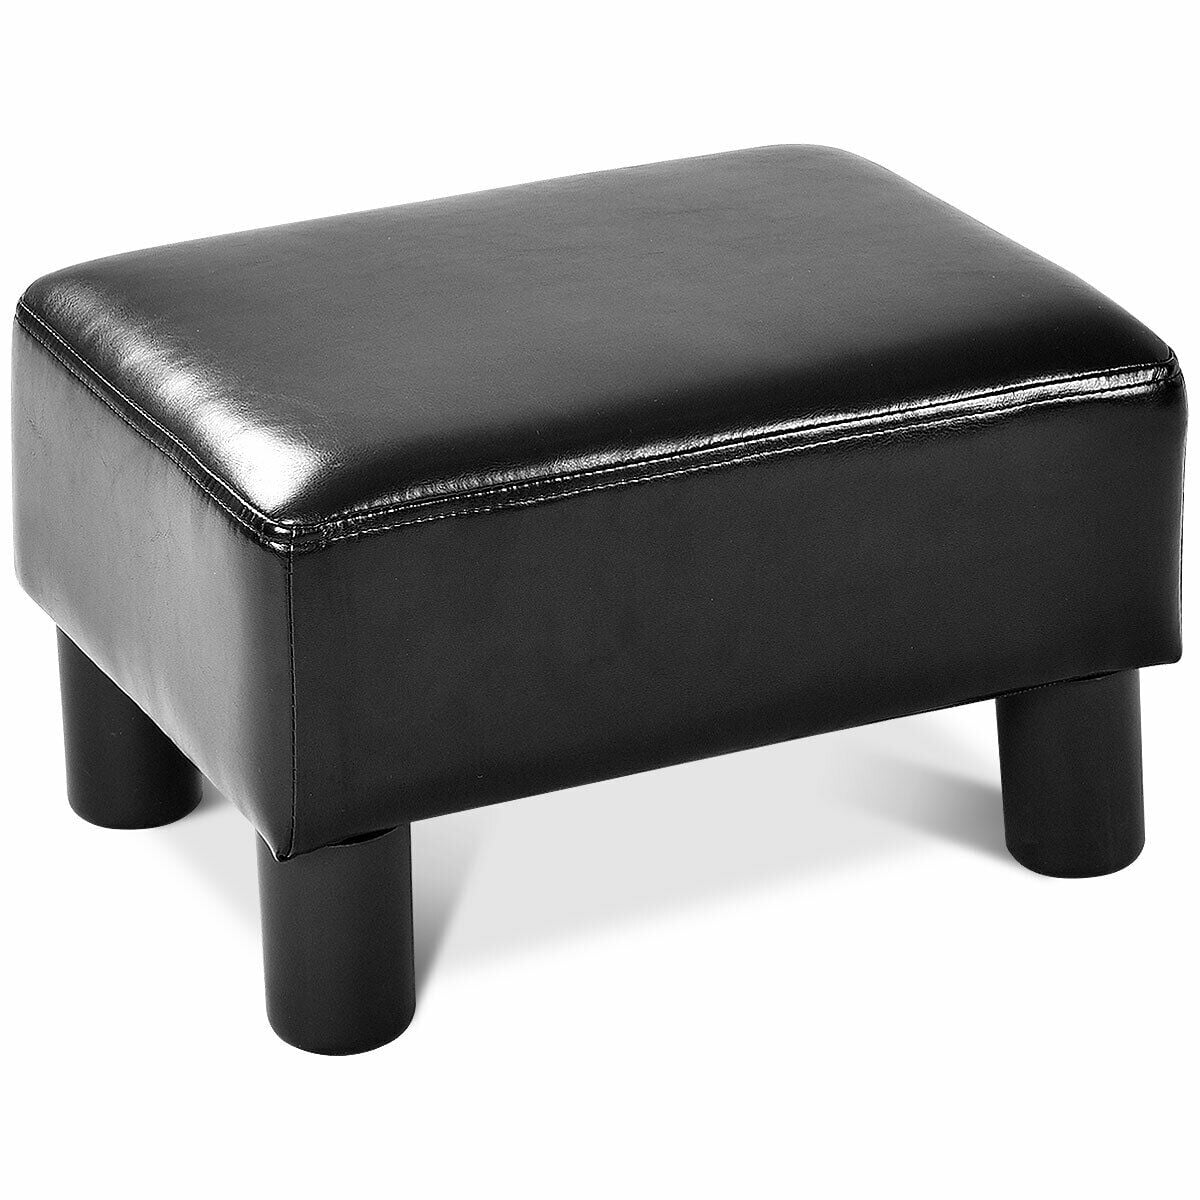 Costway Small Ottoman Footrest Pu, Black Leather Footstool